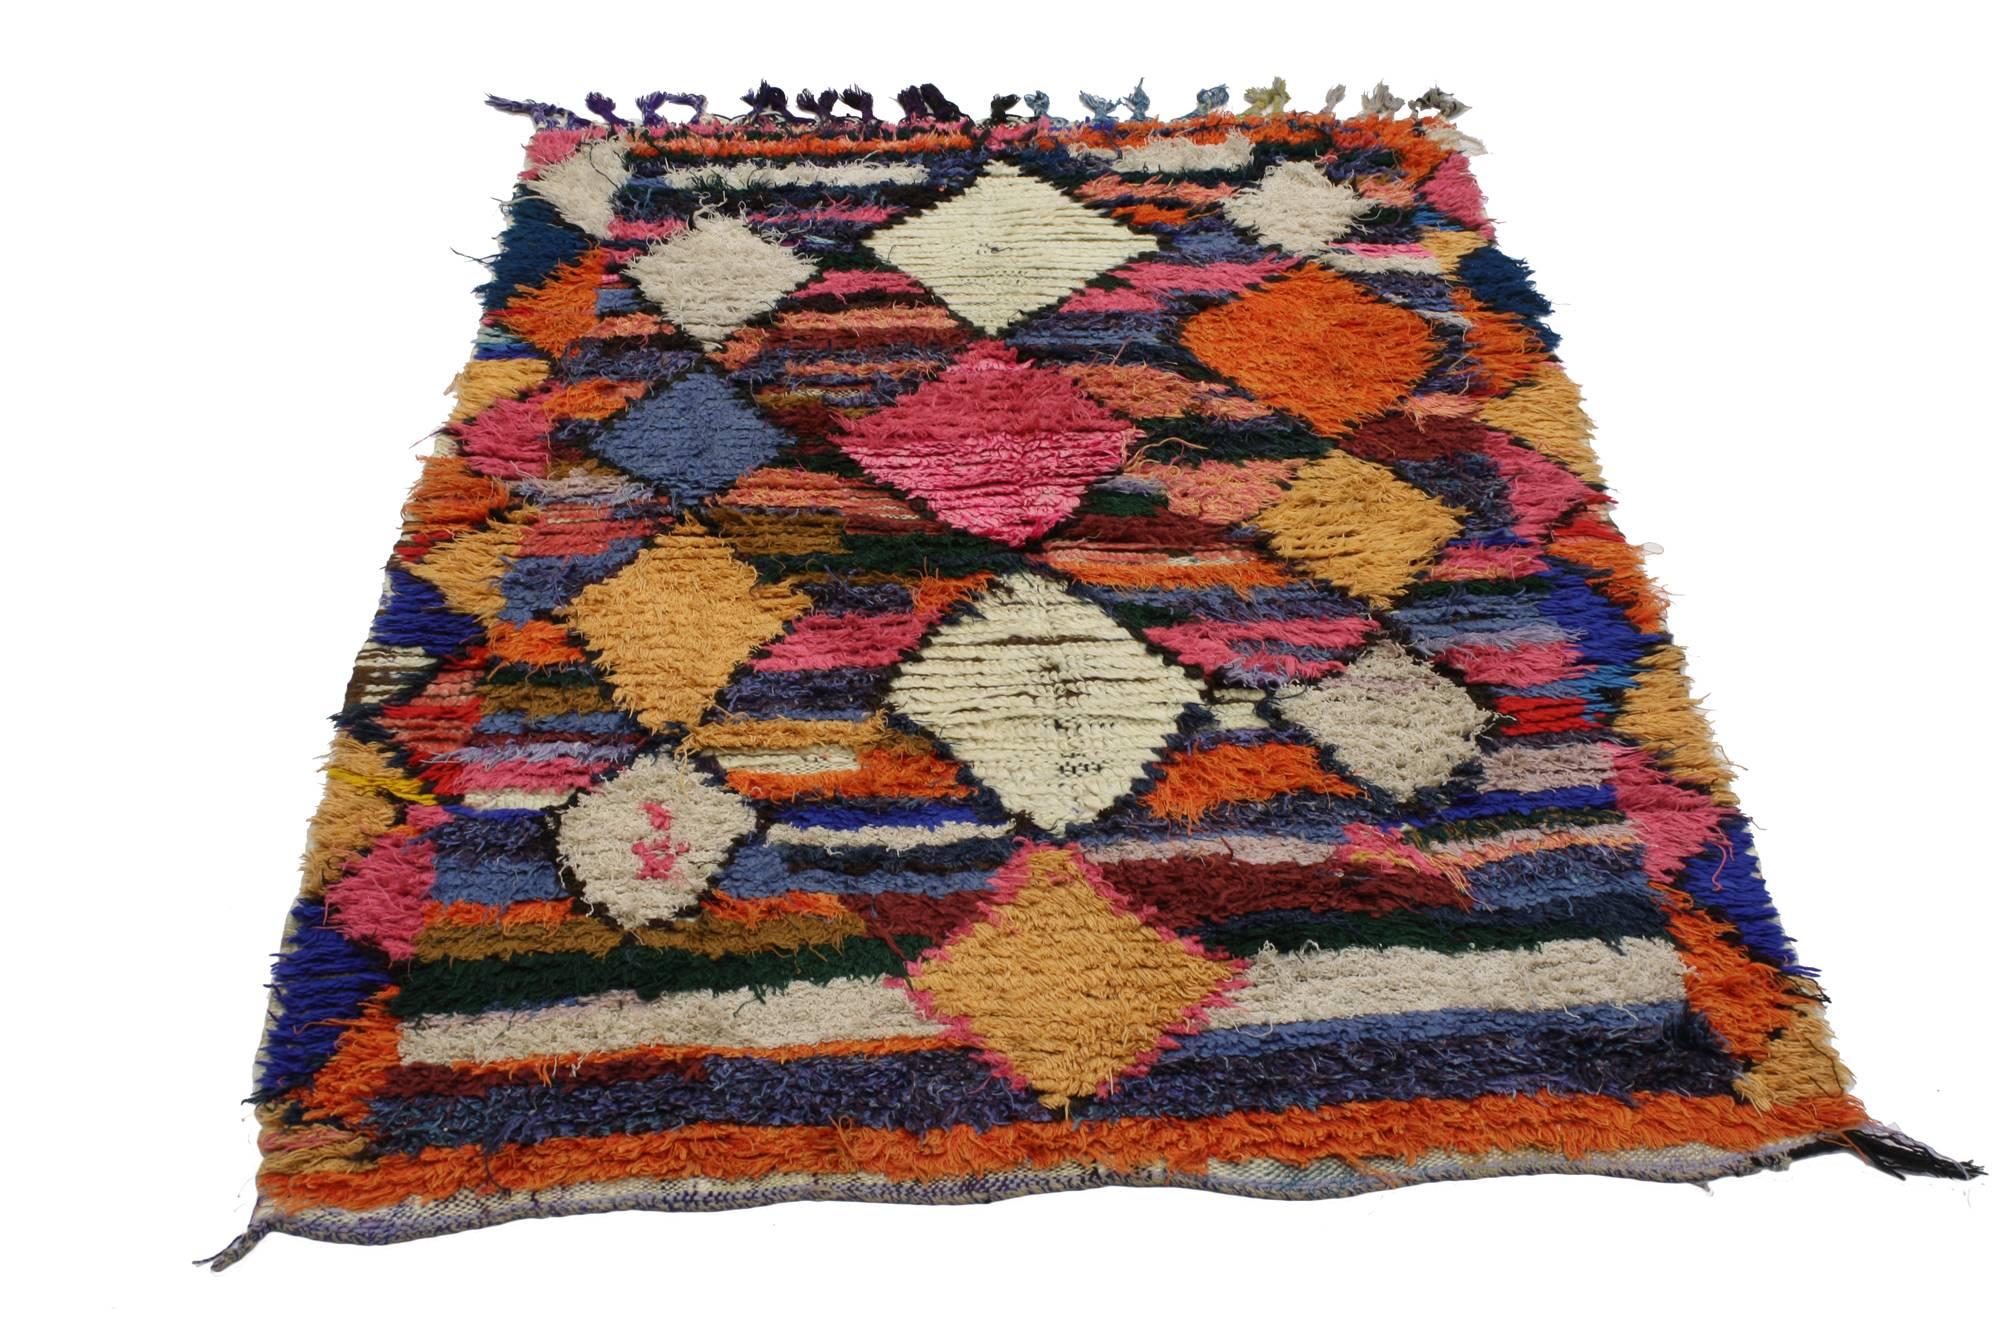 20505, vintage Berber Moroccan Boucherouite rug, Shag Accent rug. Vivacious shades of the colors woven into this vintage Berber Moroccan Boucherouite rug work together to create a truly vibrant and life-giving feel. The tribal pattern and vibrant